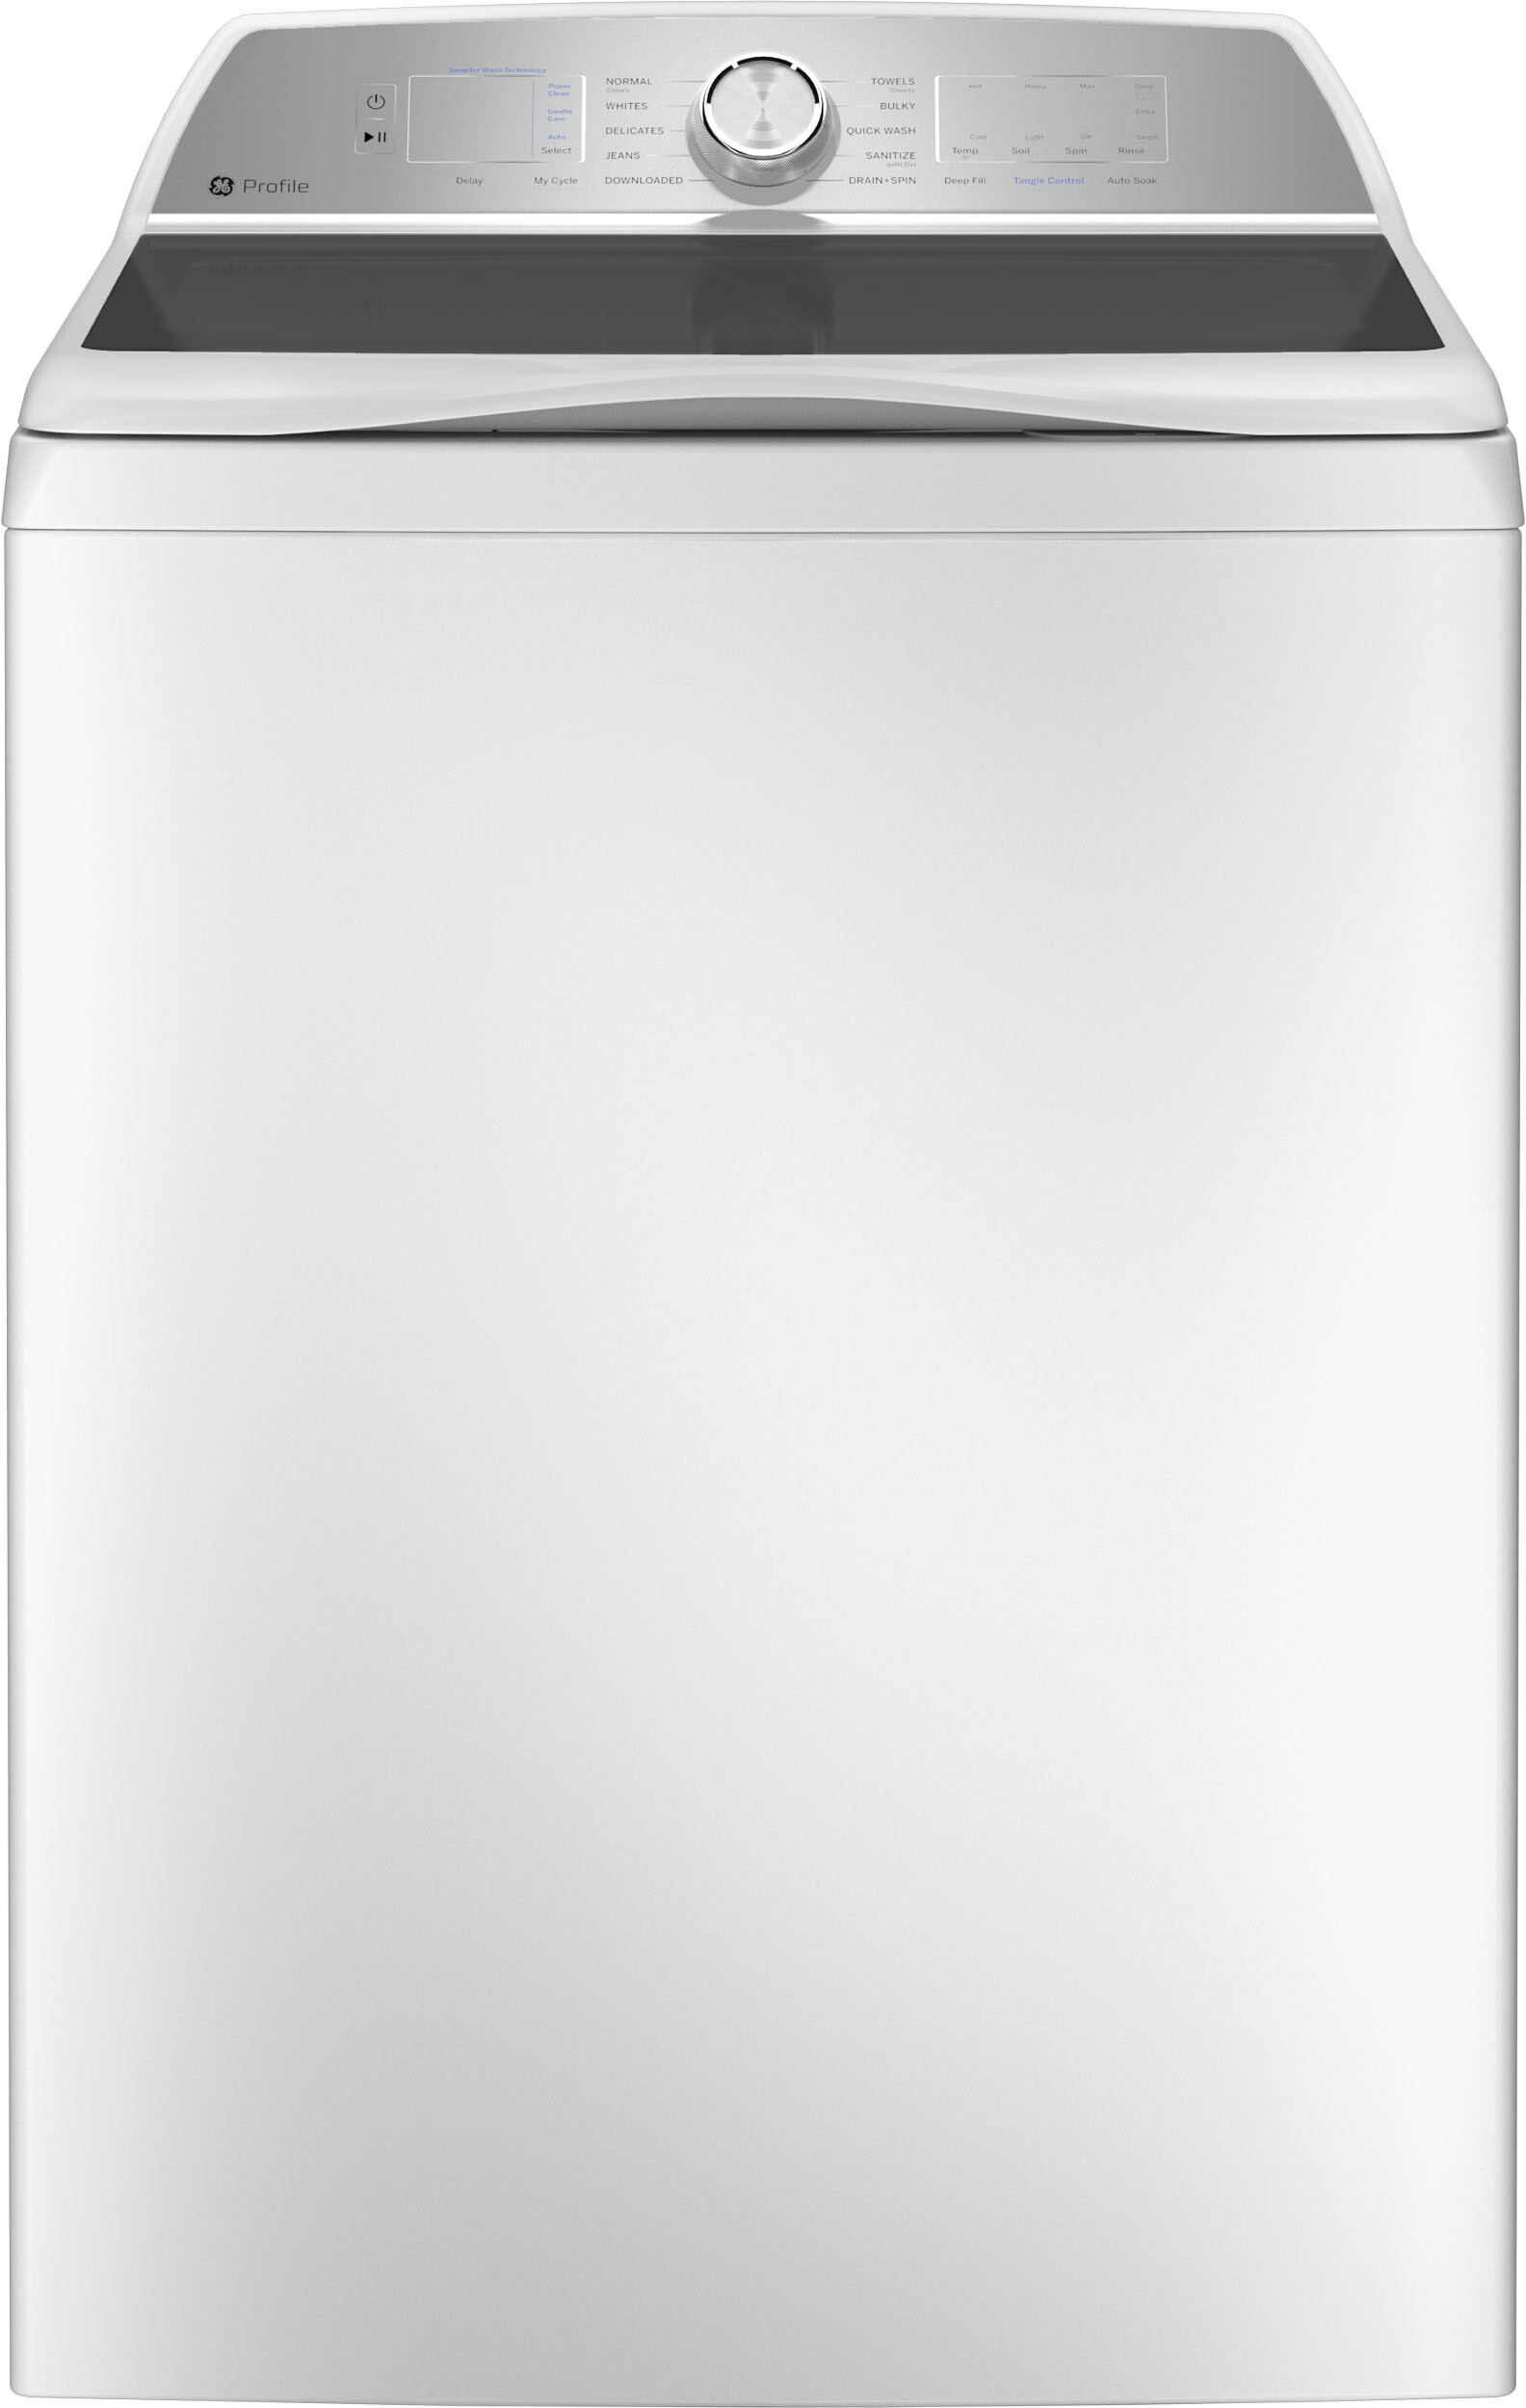 GE Profile 4.9 Cu. Ft. Top Load Washer PTW605BSRWS